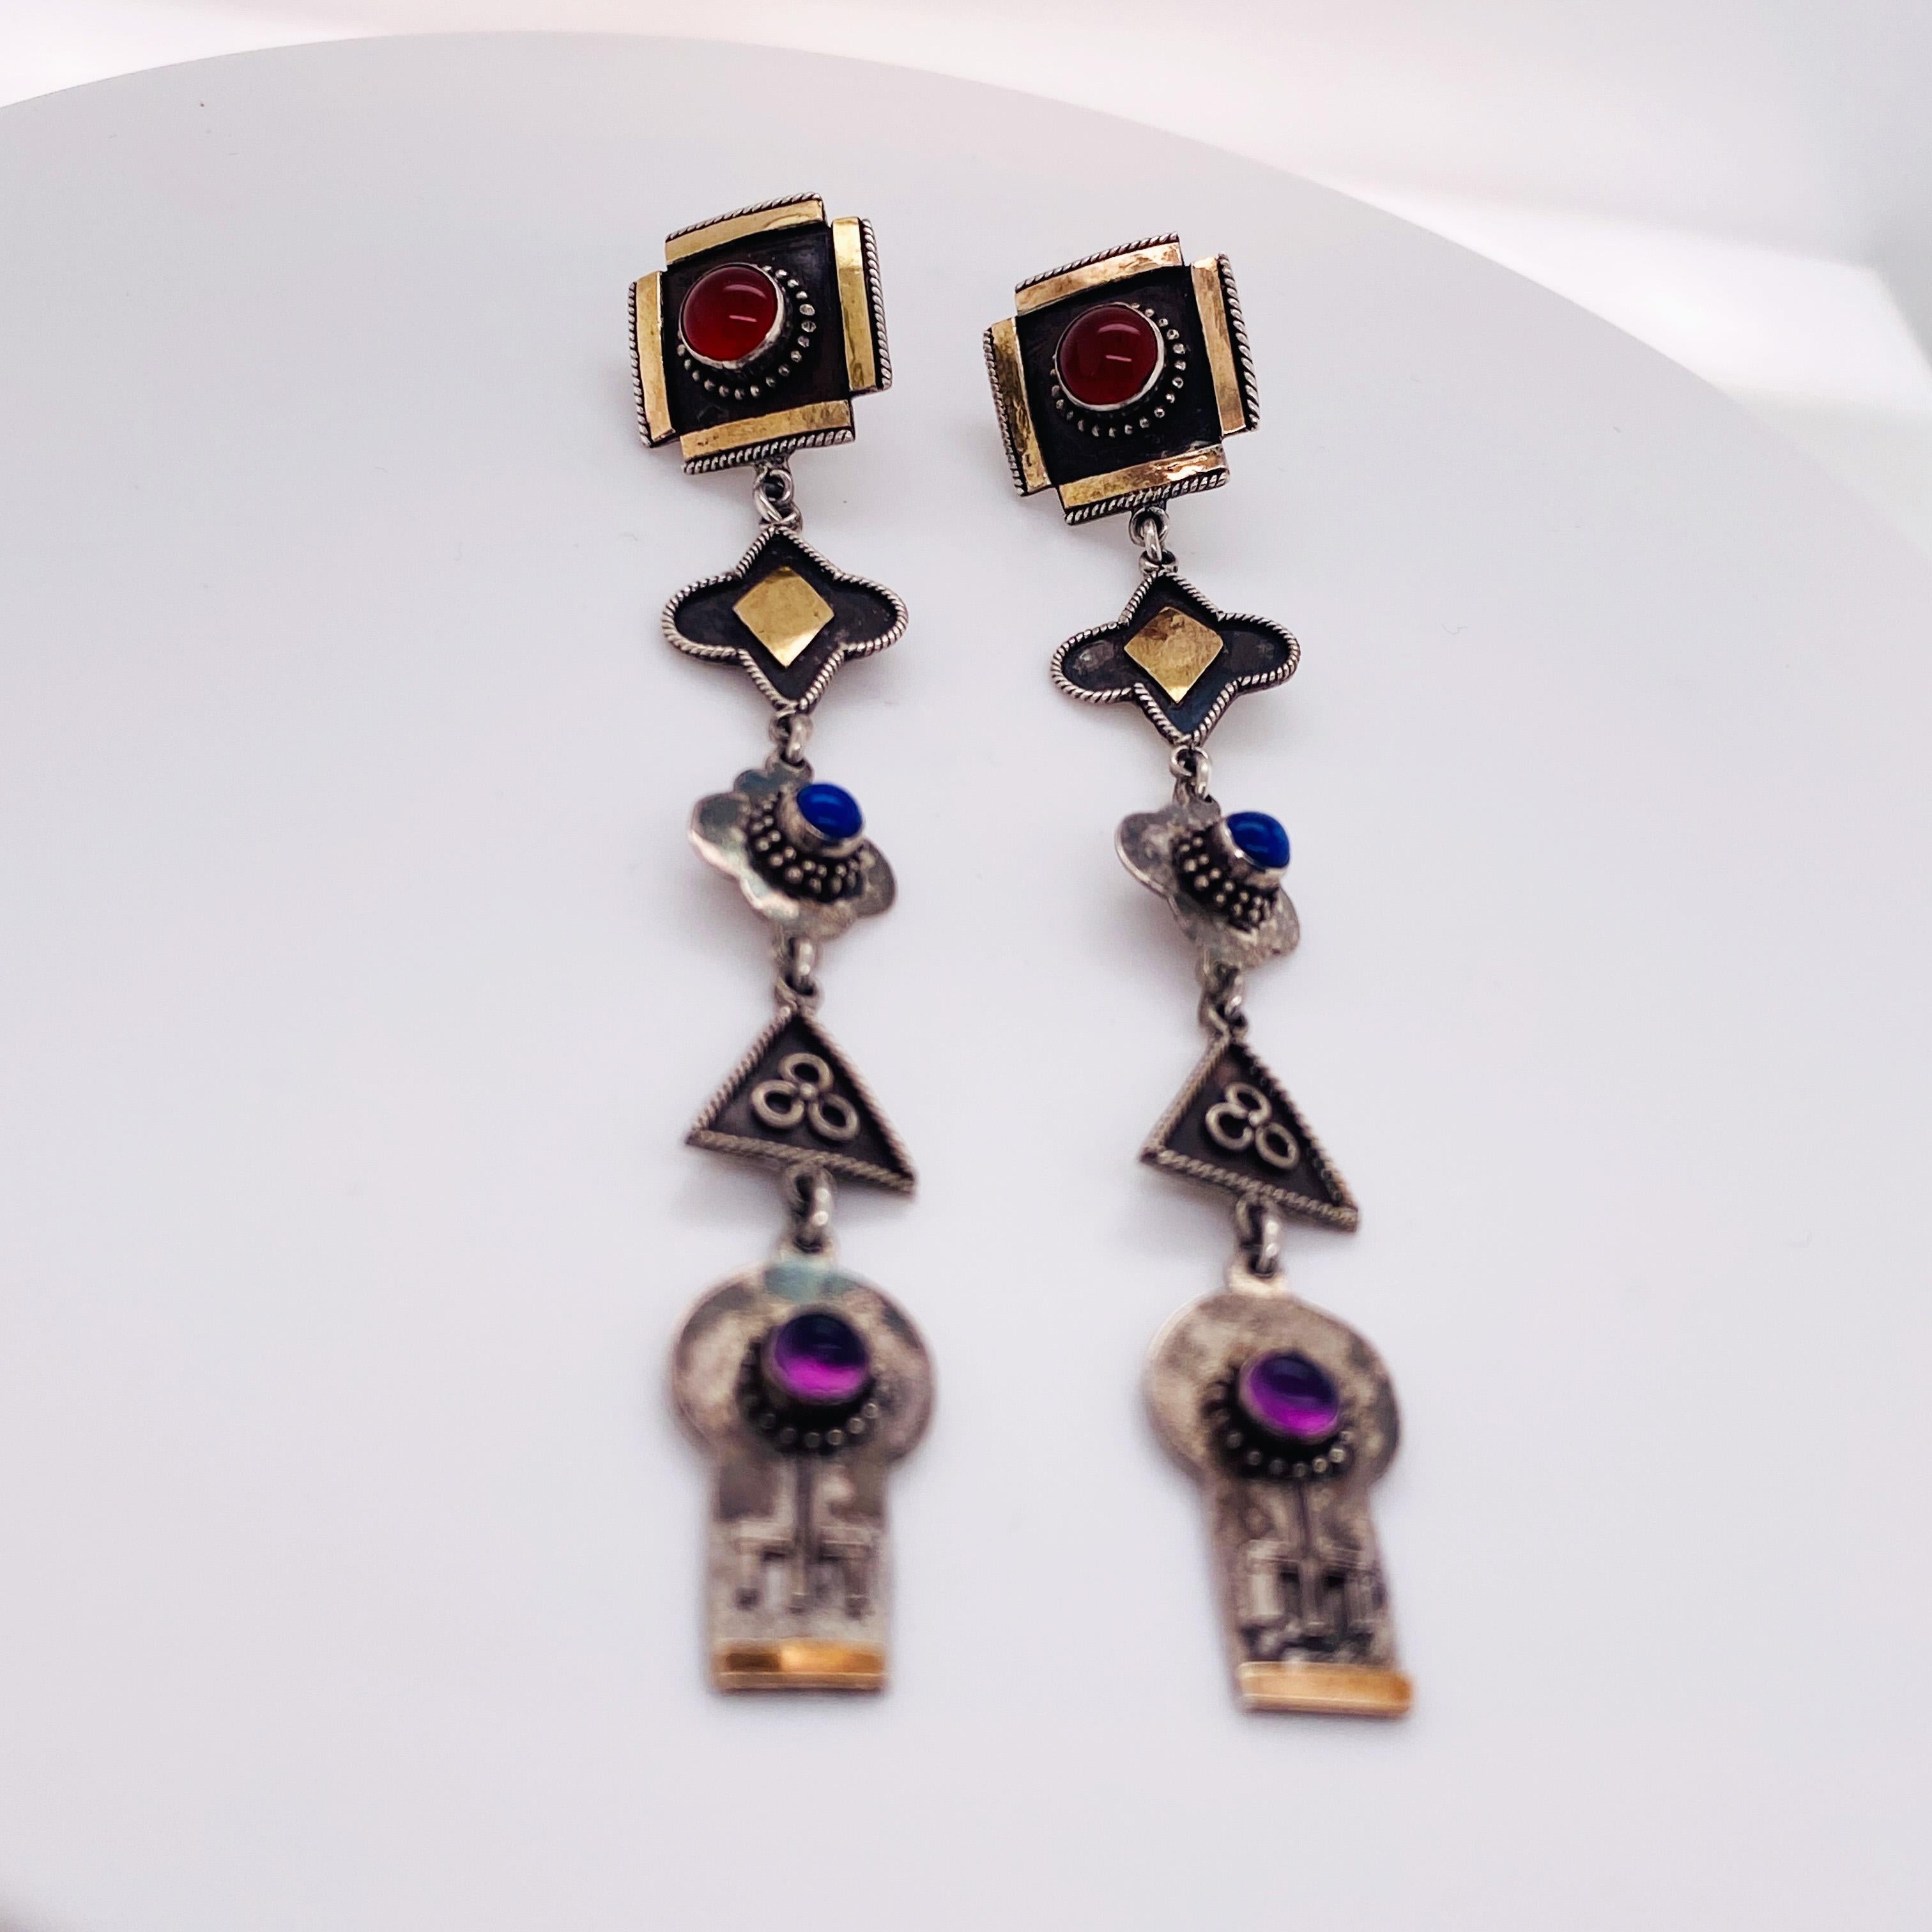 These Aztec designed, 5 tier dangle earrings have incredible workmanship. If you like long drop earrings with personality, you will LOVE these earrings! These earrings are solid sterling silver and each piece of these earrings is unique. The tops